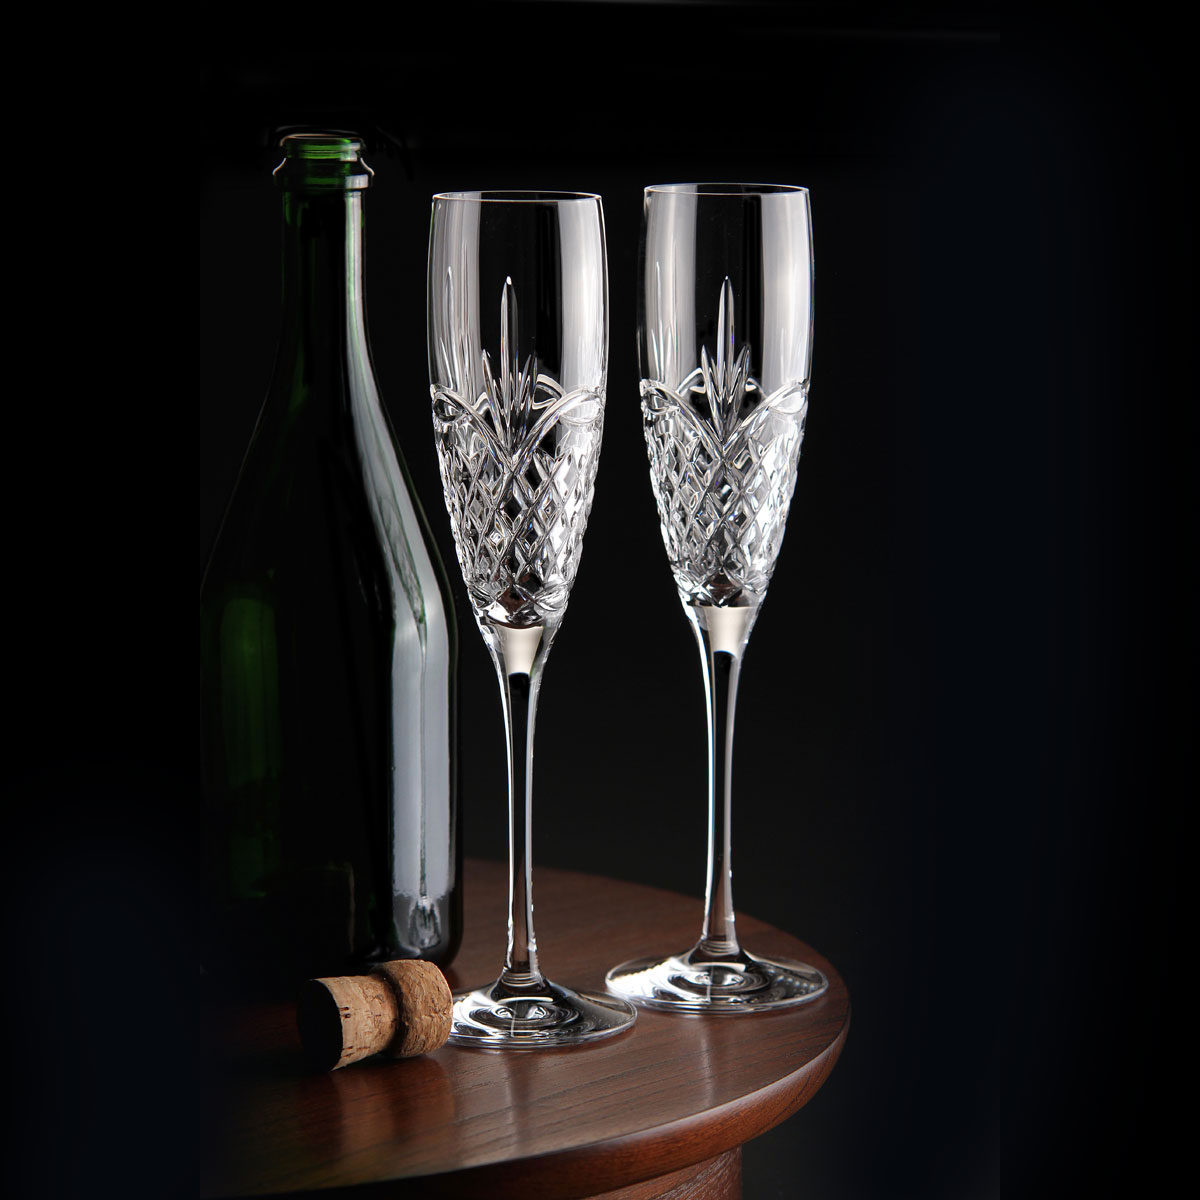 True Love Set of 2 Lead Crystal Champagne Flutes